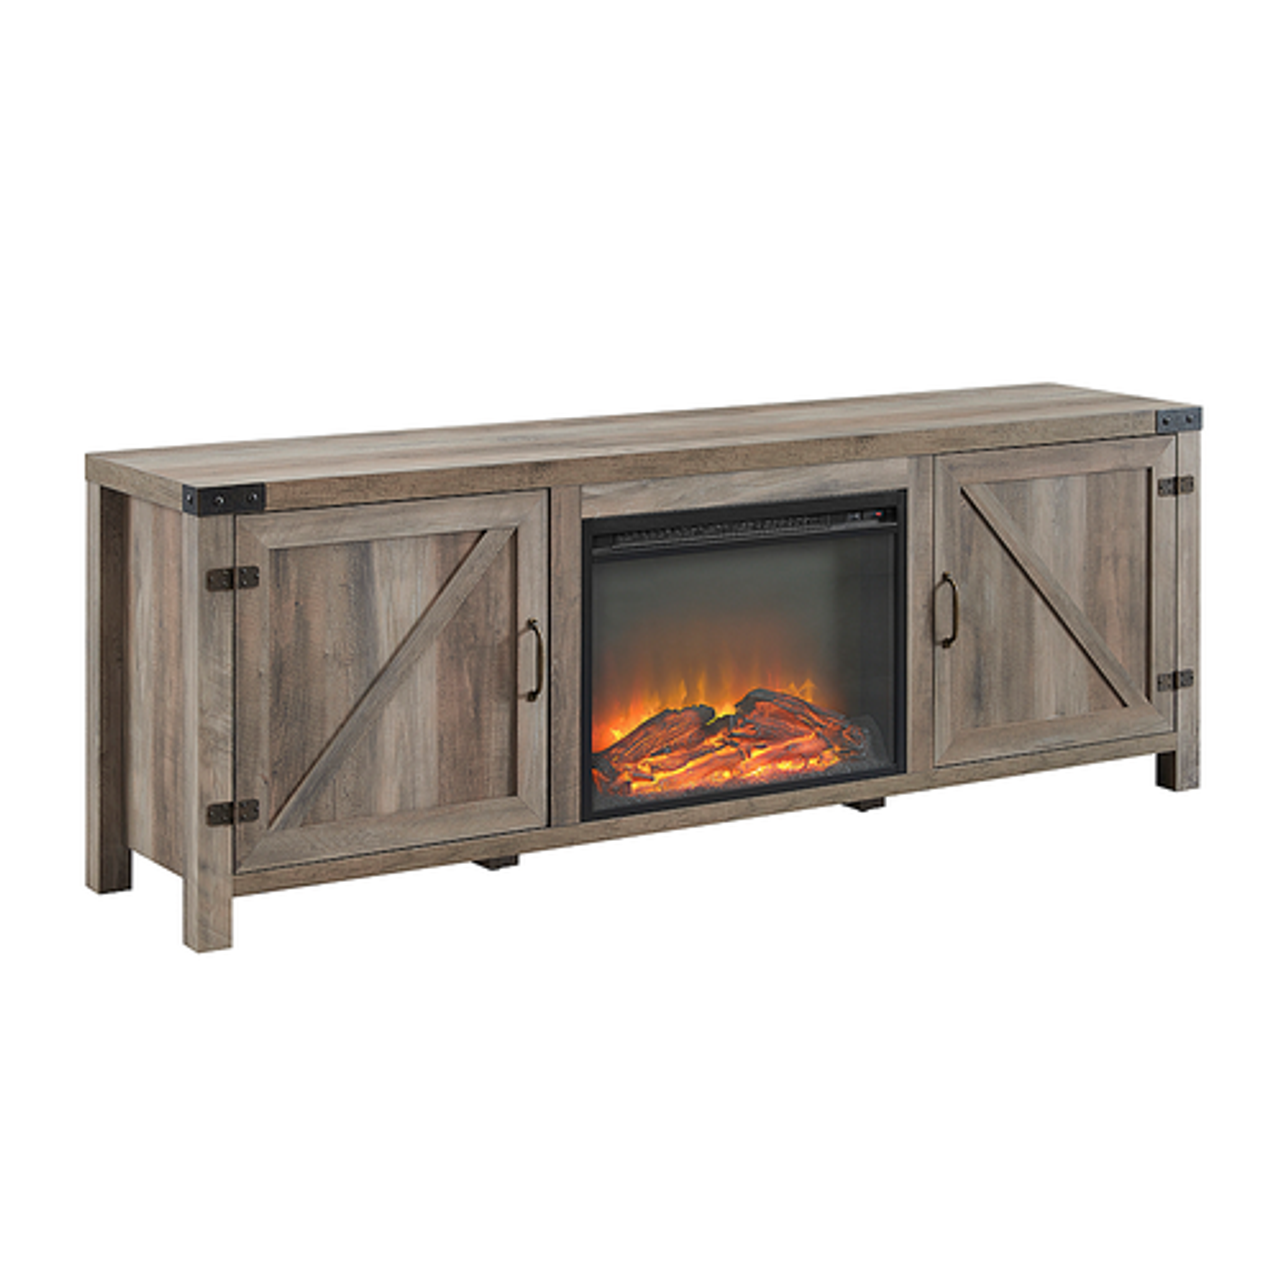 Walker Edison - 70” Barn Door Fireplace TV Stand for TVs up to 80” - Grey Wash